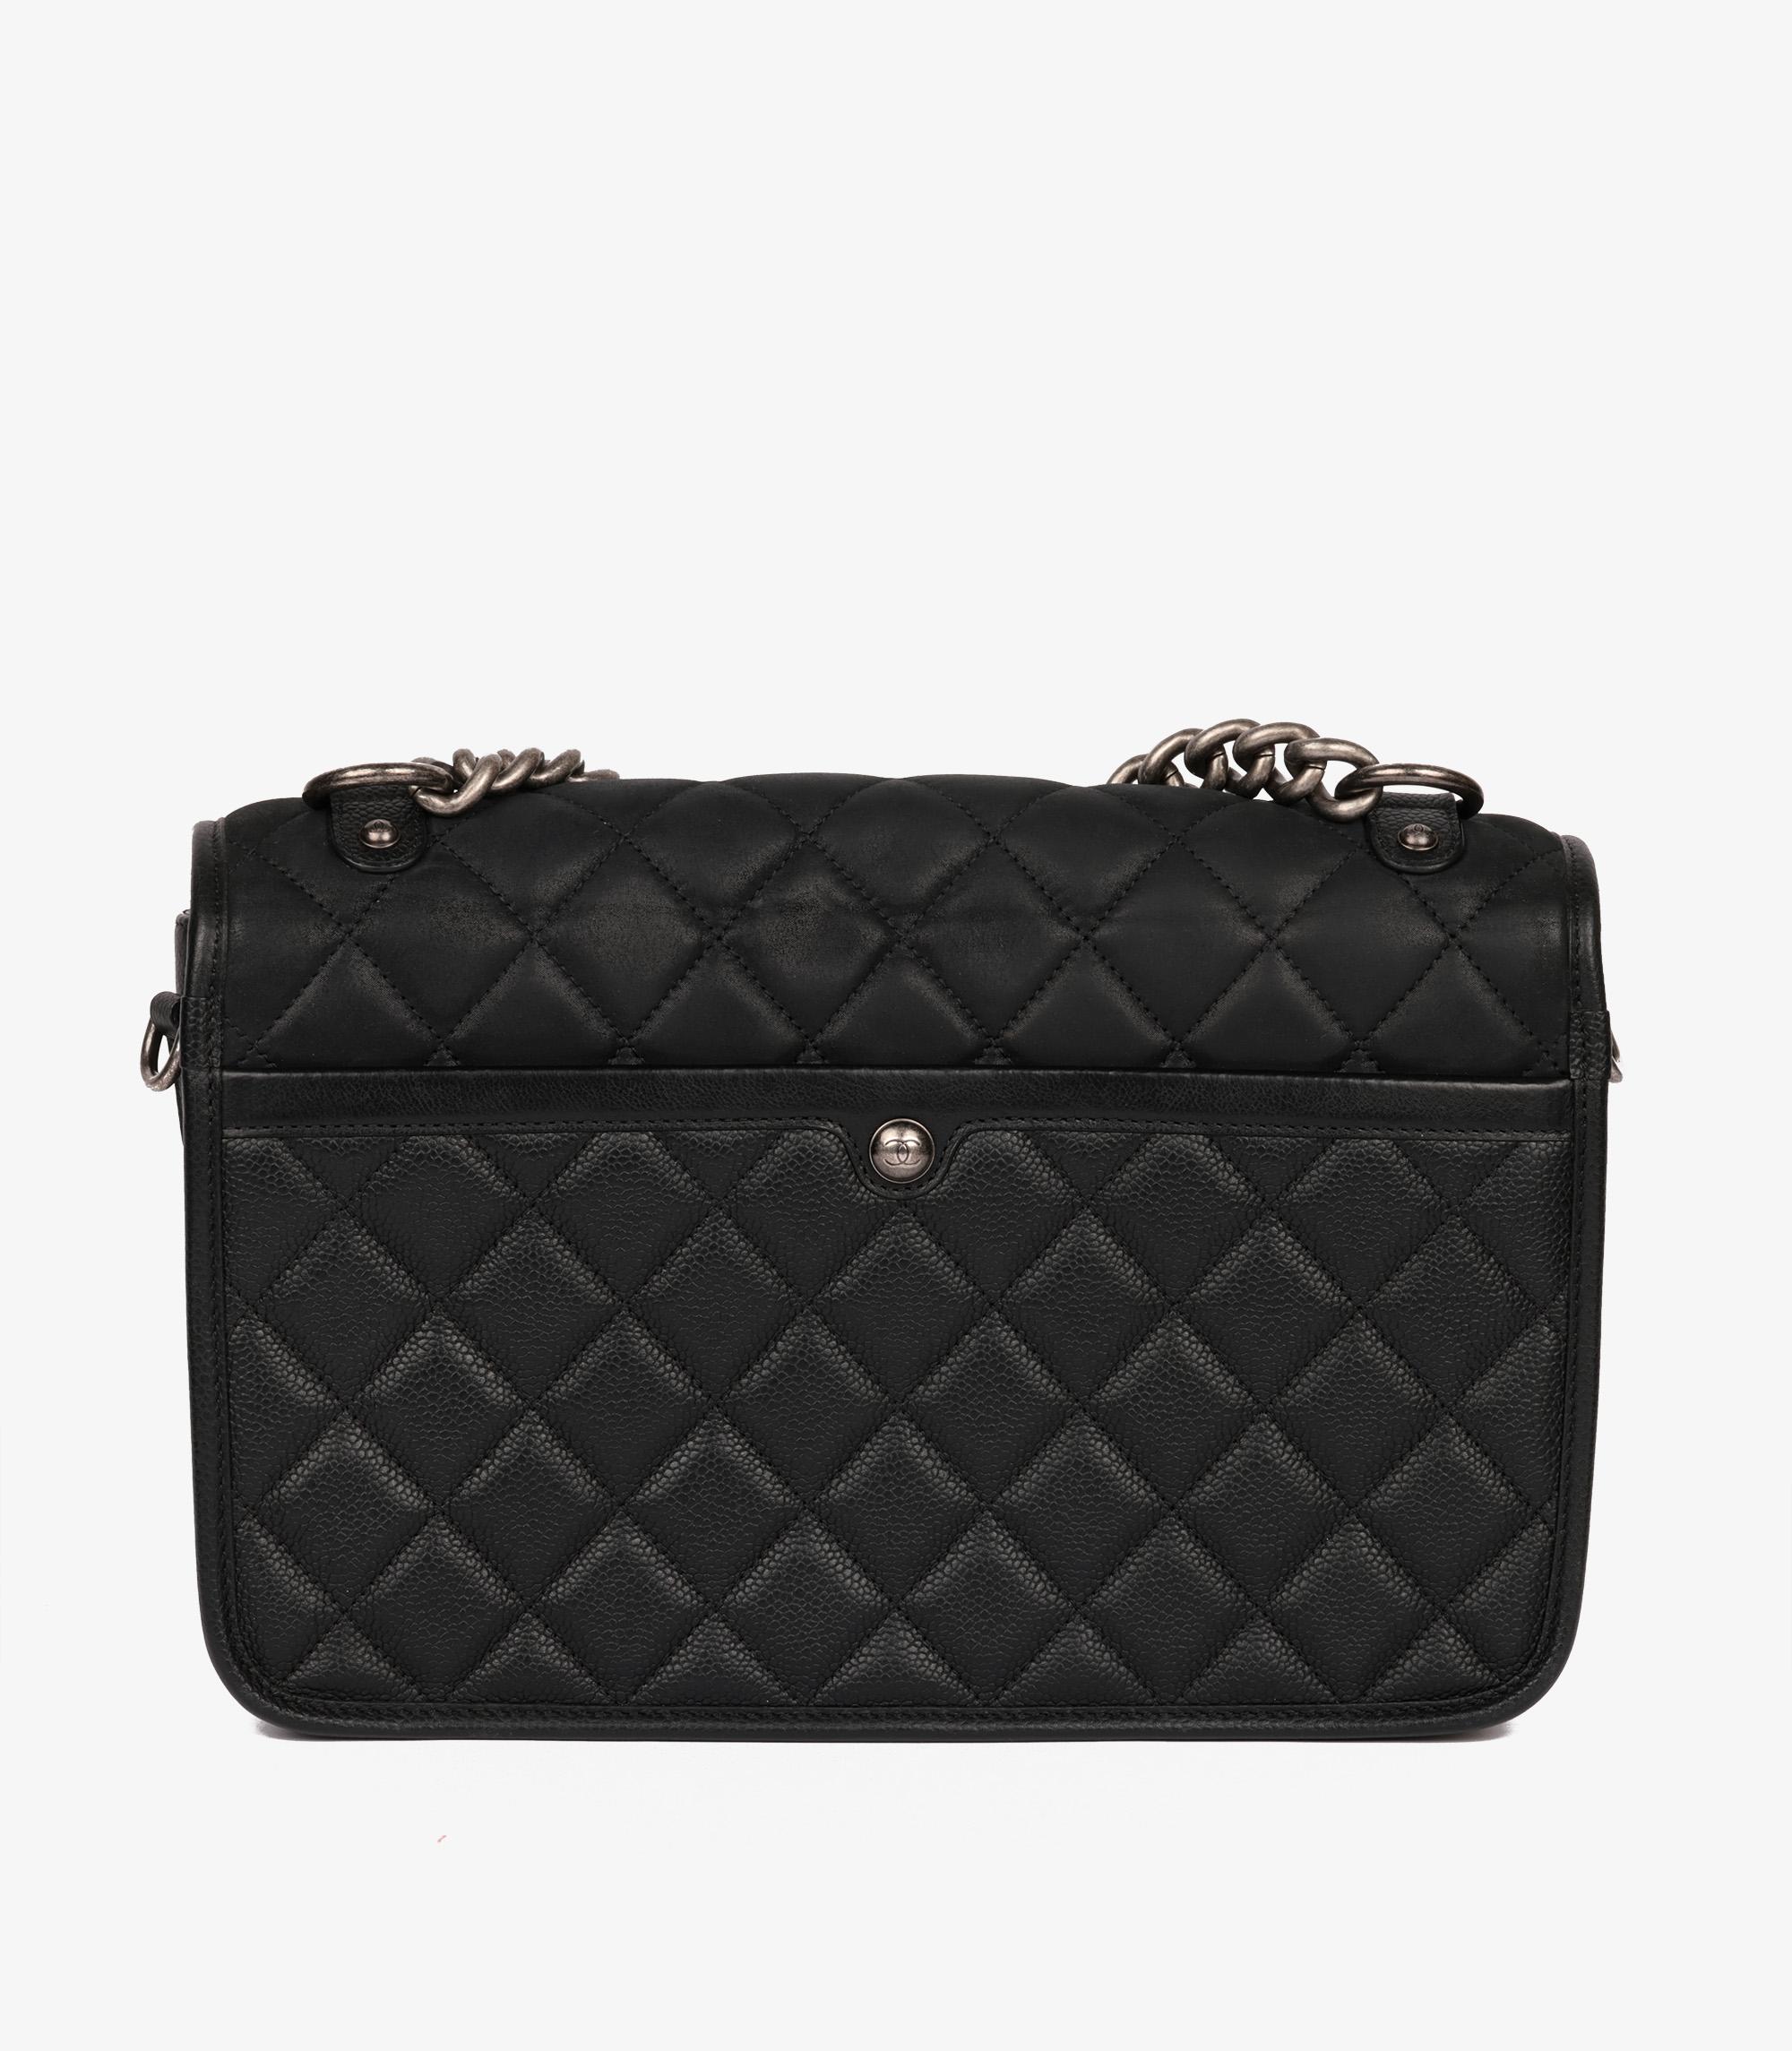 Chanel Black Quilted Caviar Leather & Iridescent Calfskin Daily Carry Messenger For Sale 8